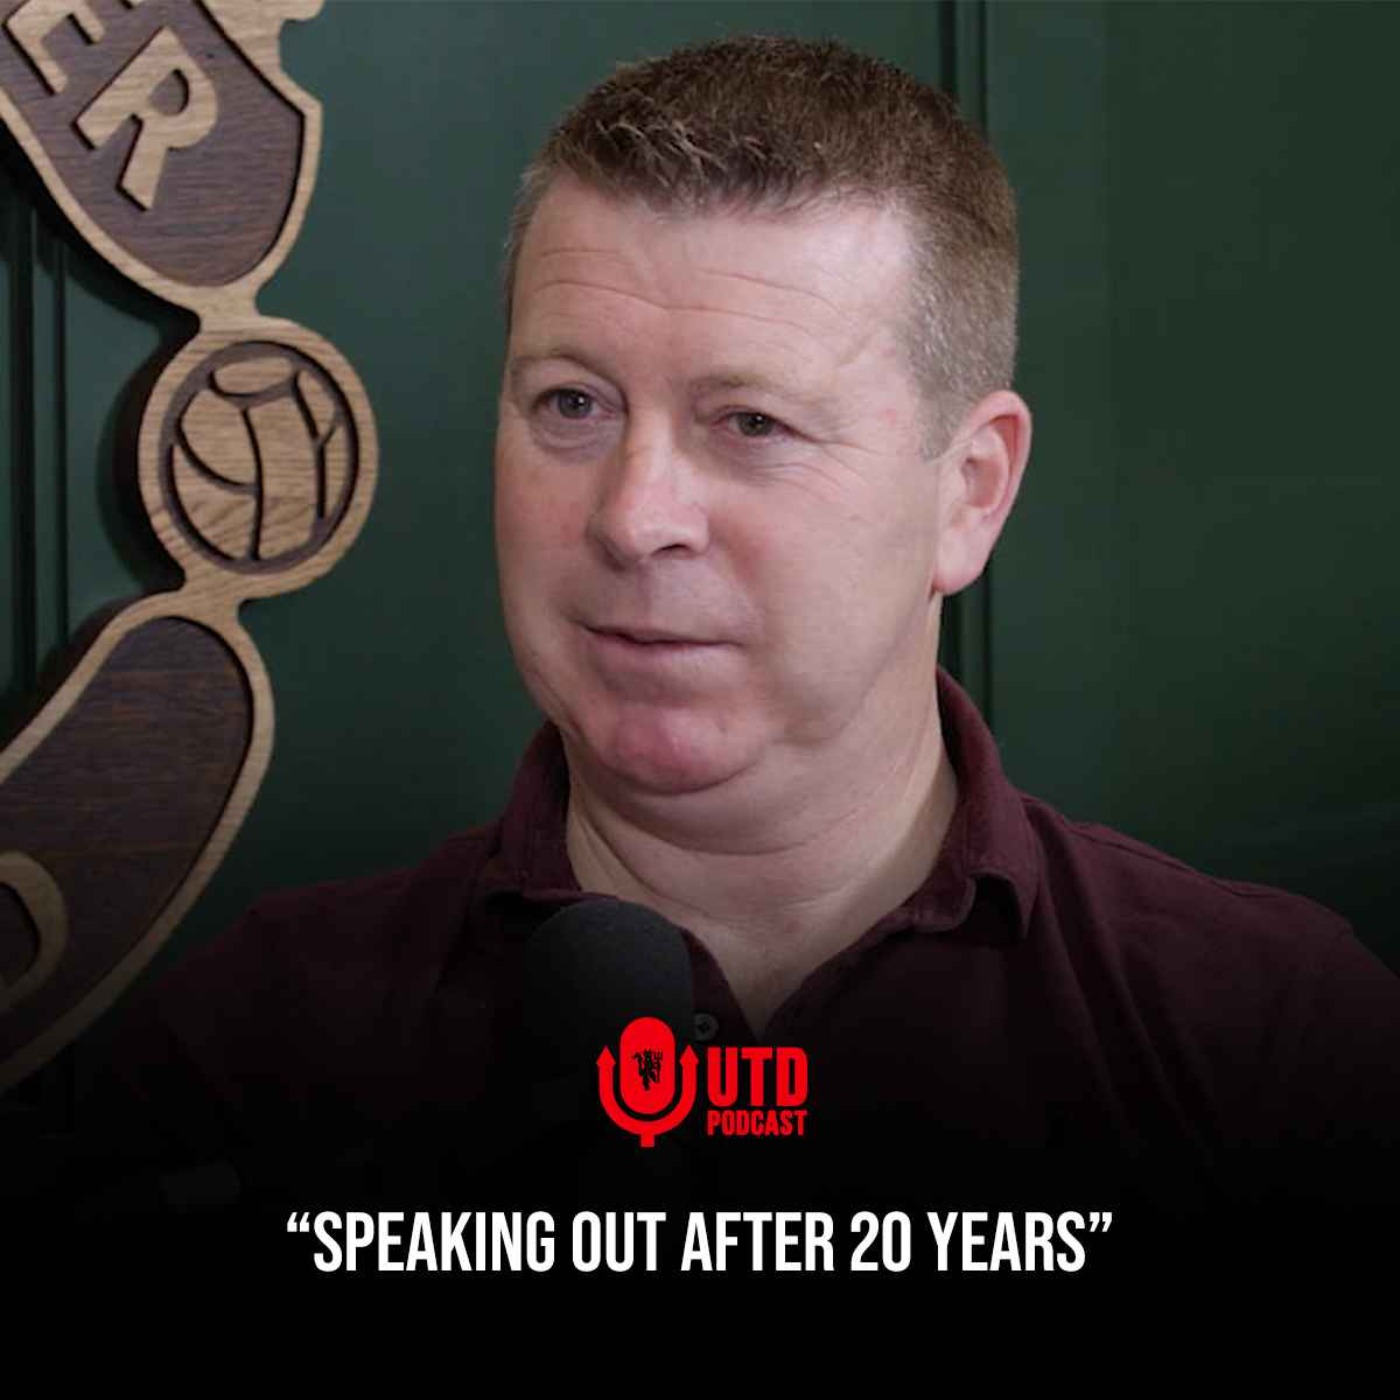 Pat McGibbon - Speaking out after 20 years